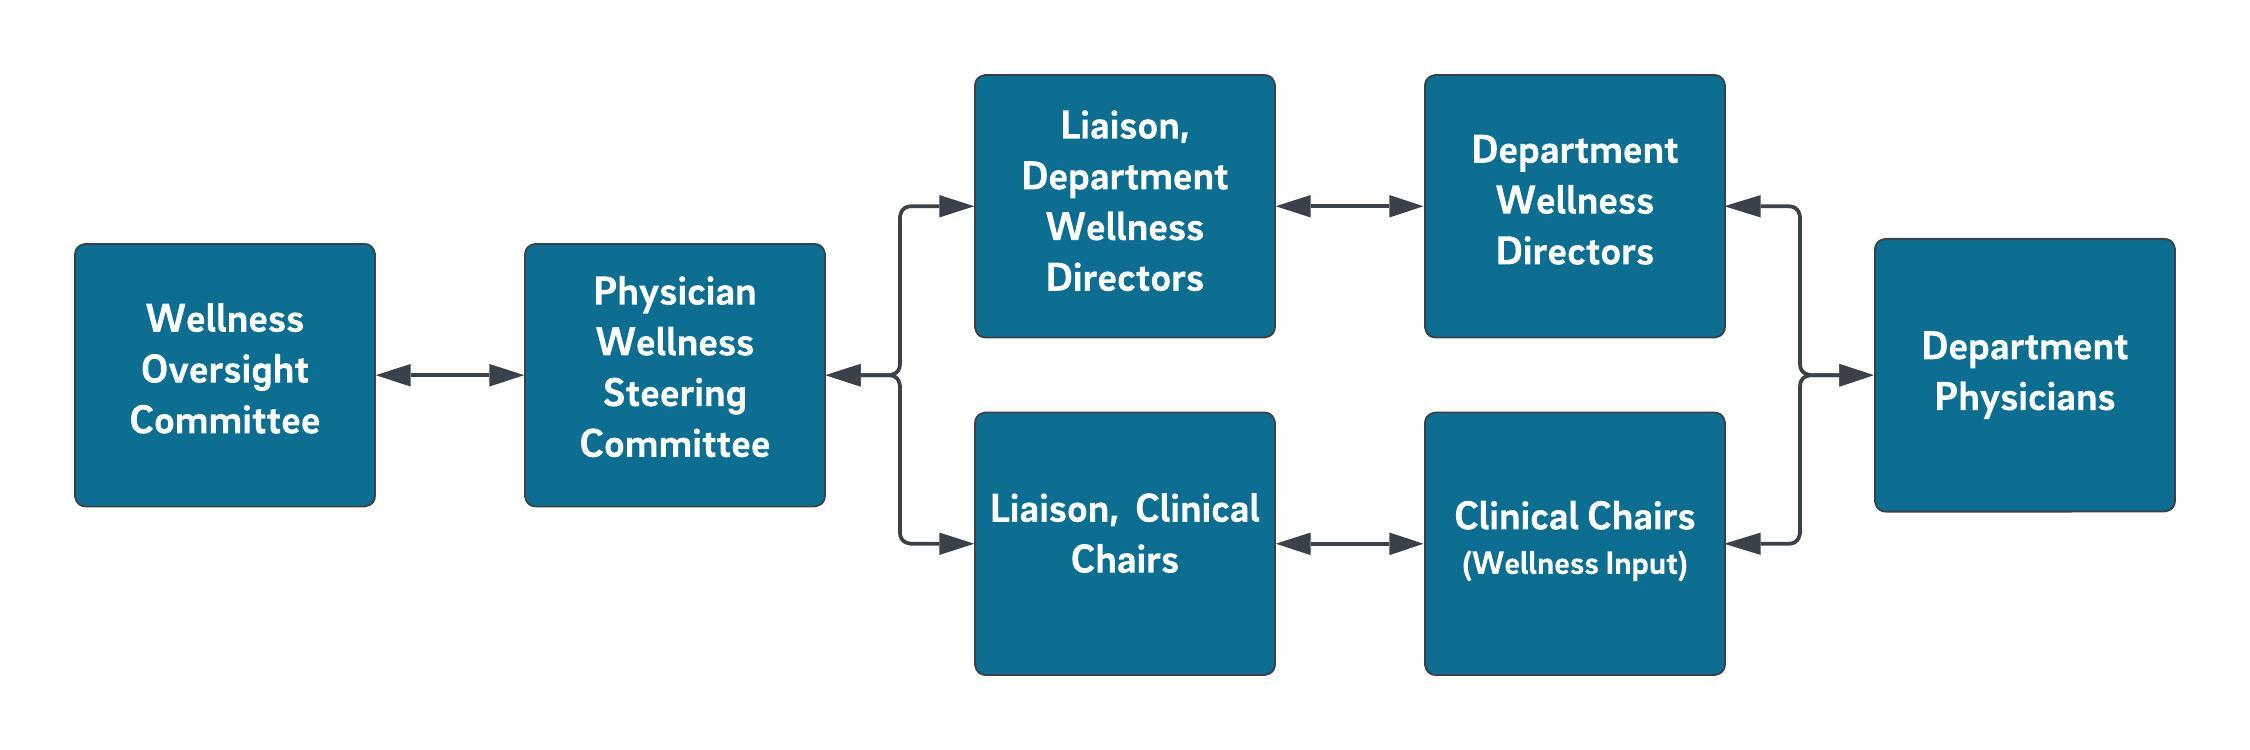 Flowchart indicating bidirectional communication pathways between the Wellness Oversight Committee, Physician Wellness Steering Committee, Liaisons for the Clinical Chairs and Department Wellness Directors, the Clinical Chairs and Department Wellness Director Committee, and the Department Physicians